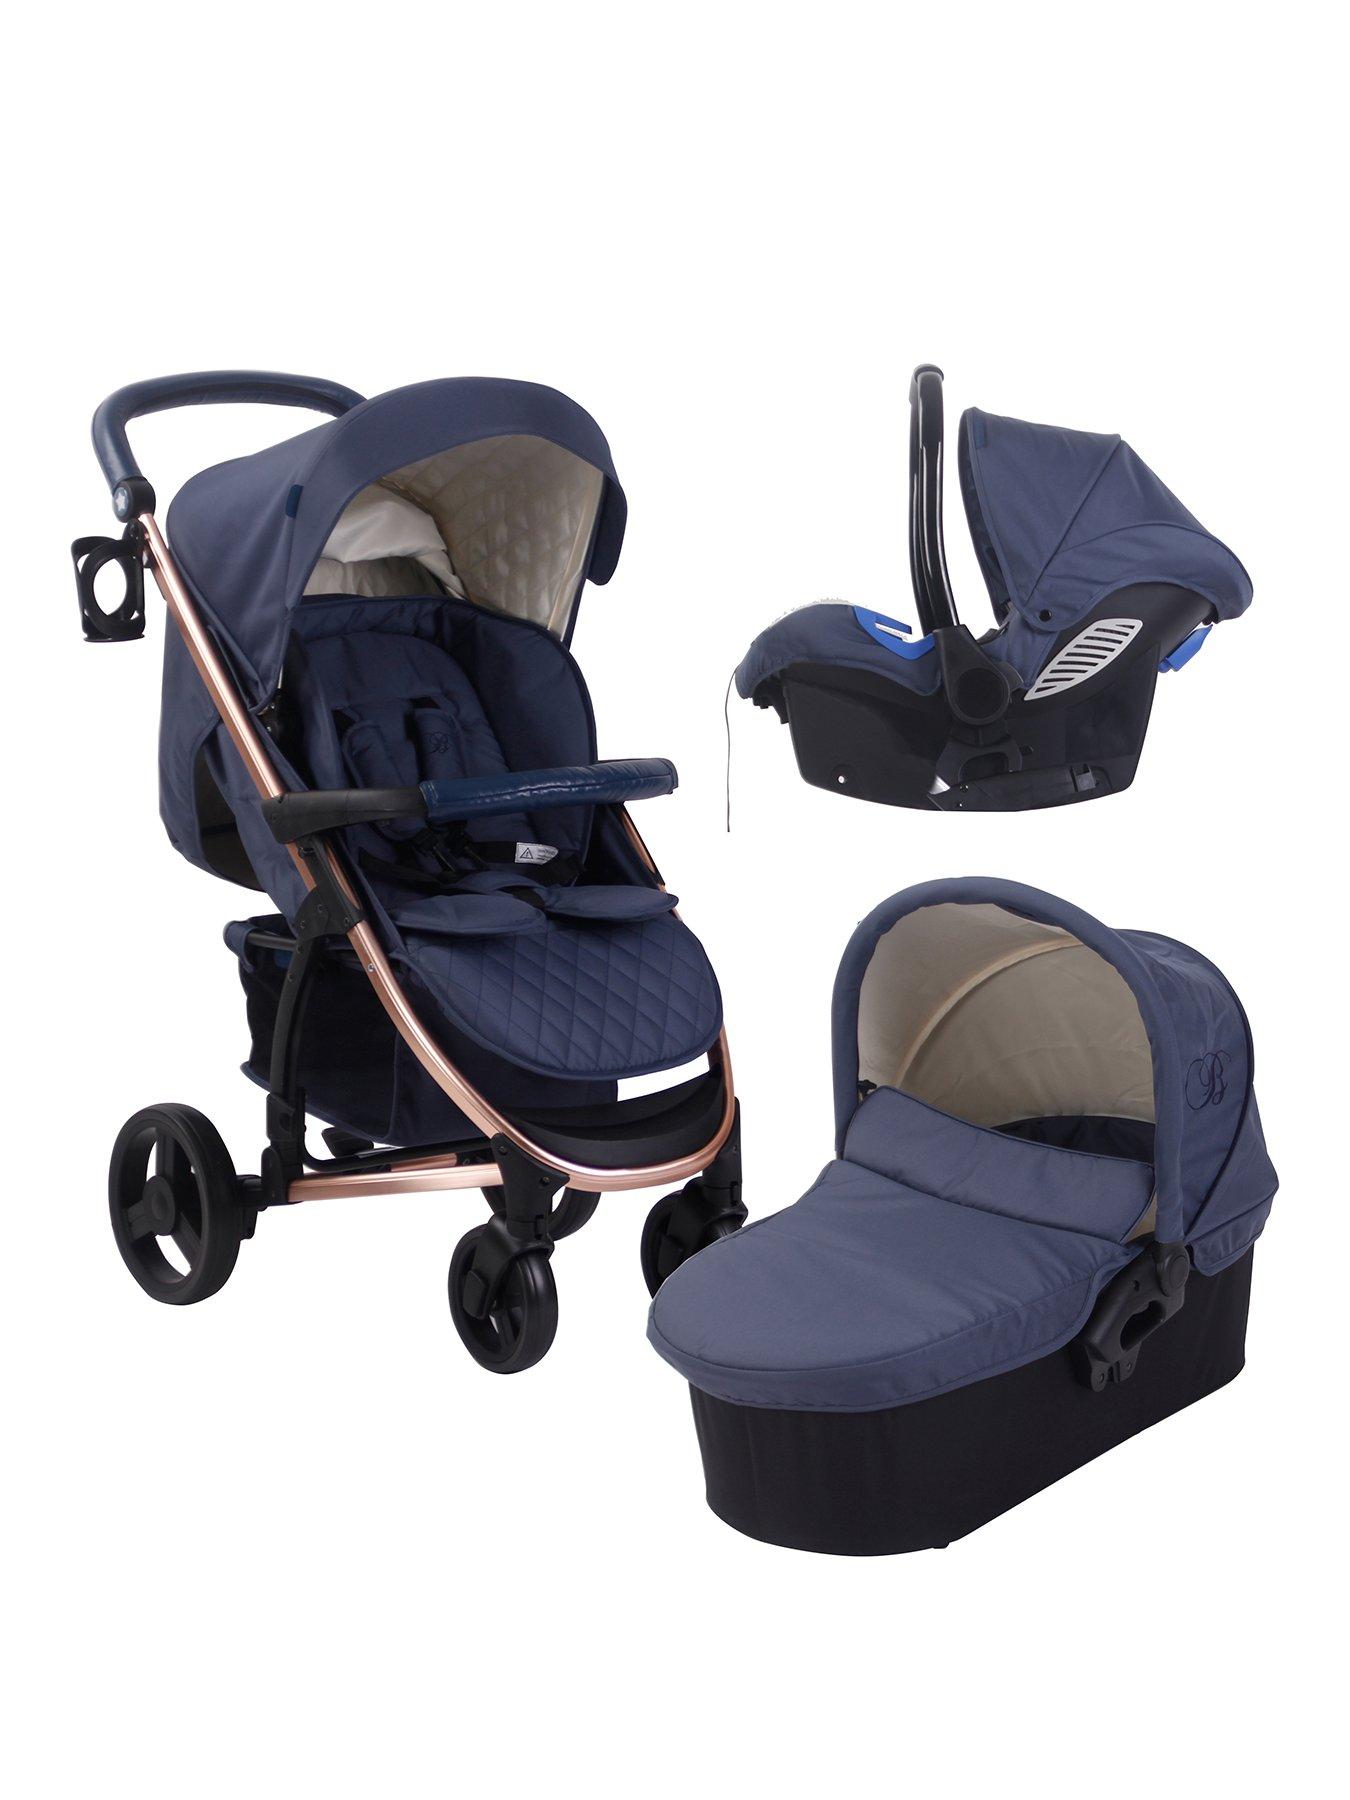 billie faiers travel systems